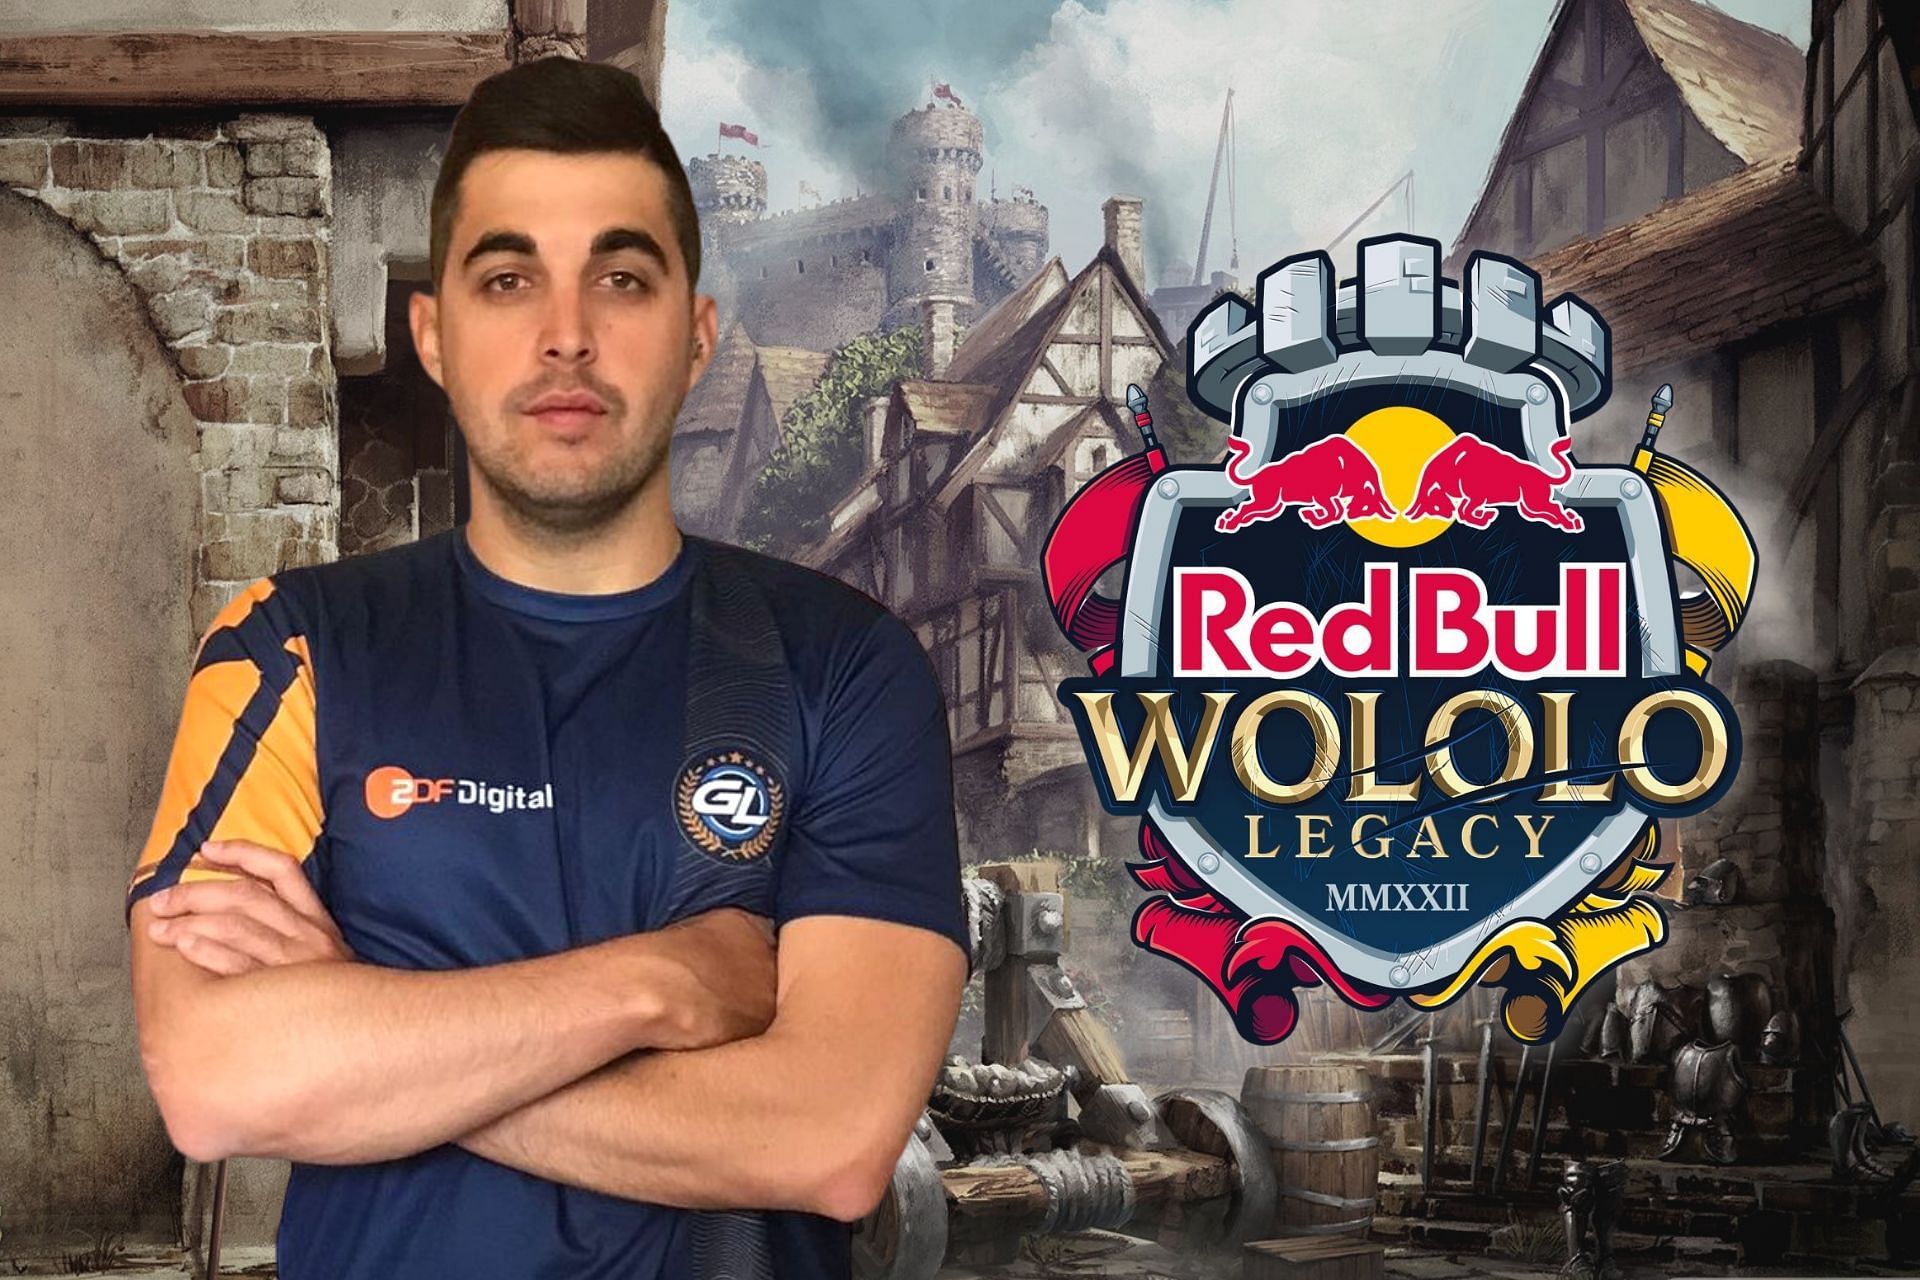 Red Bull Wololo VI: Legacy has ended, and TaToH claimed victory in Age of Empires 2 (Image via Sportskeeda)